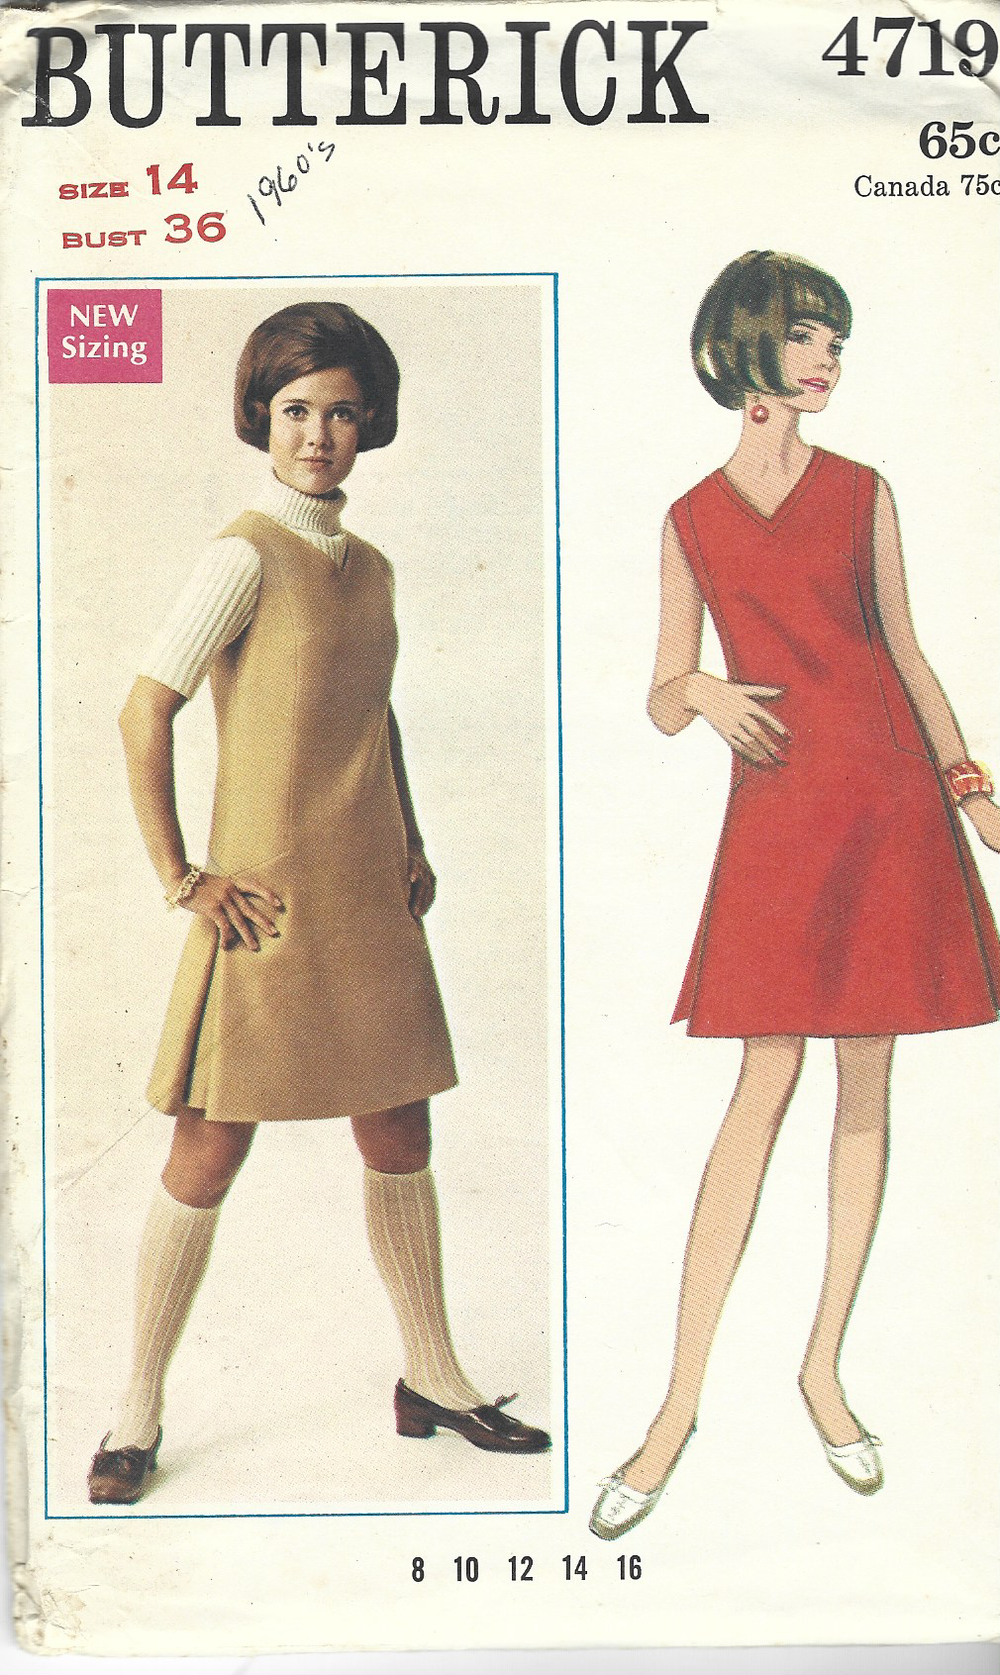 Butterick 4719 Ladies One Piece Jumper Dress Vintage Sewing Pattern 1960s